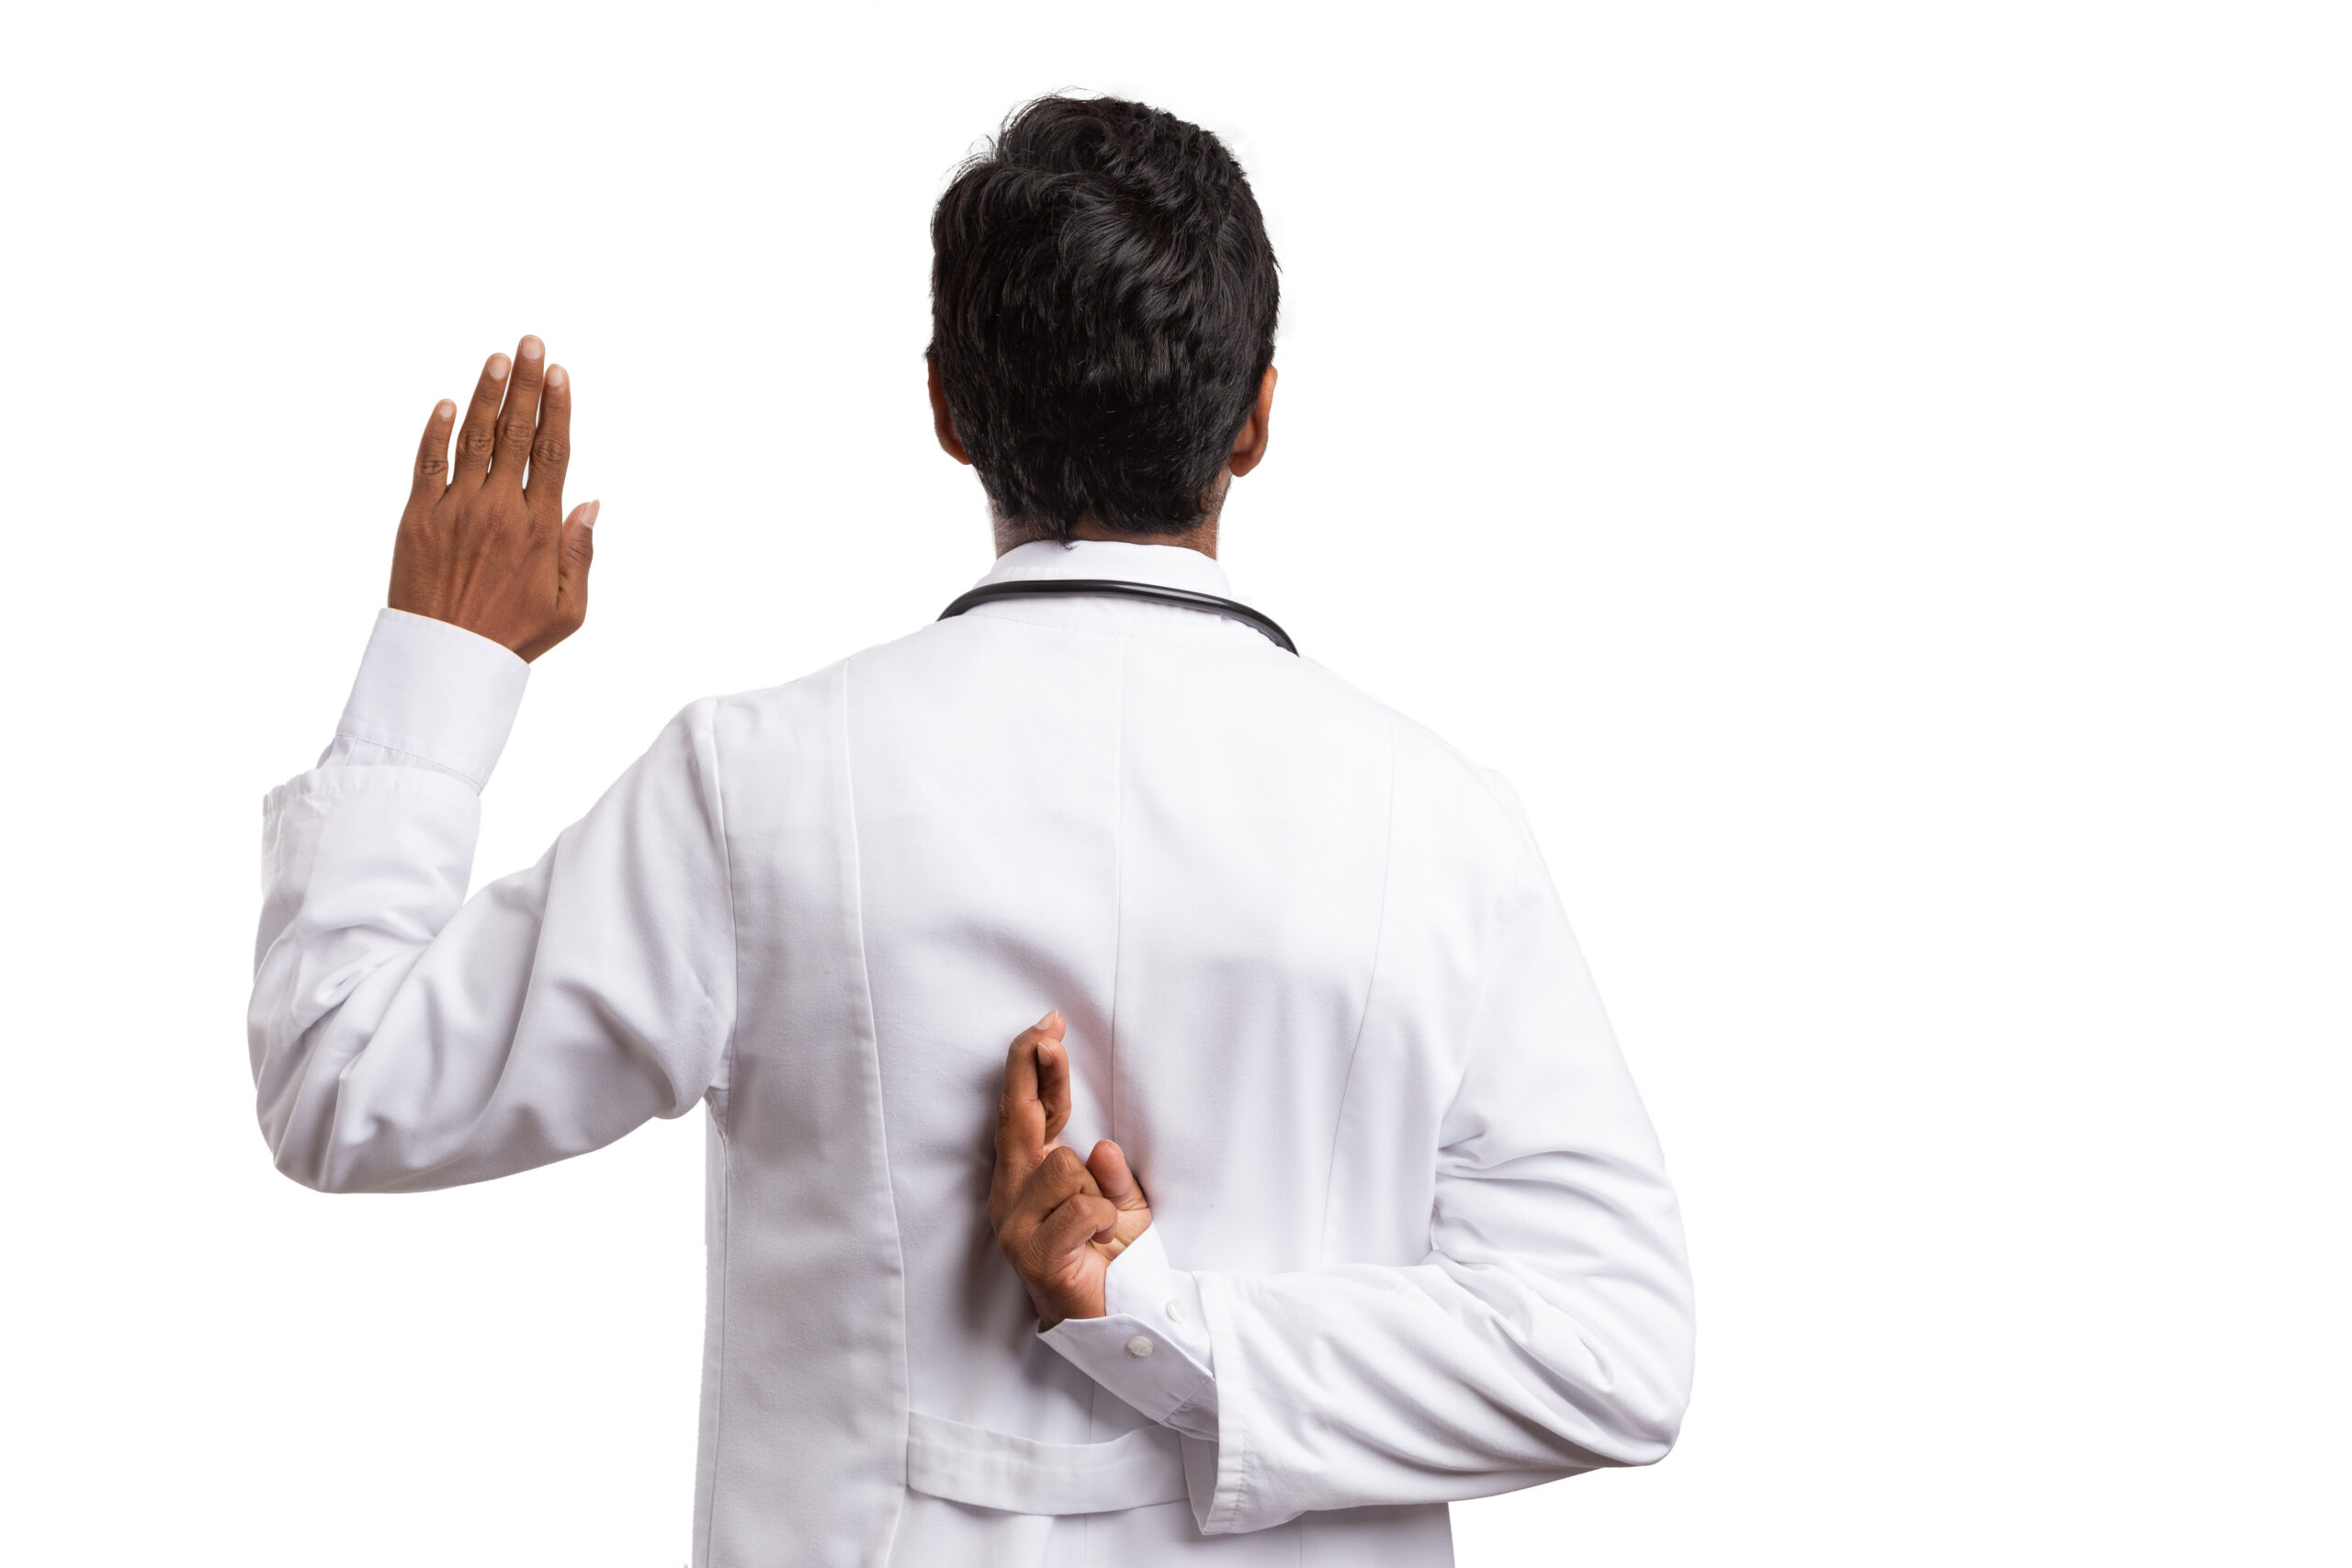 Doctor taking an oath with fingers crossed behind his back